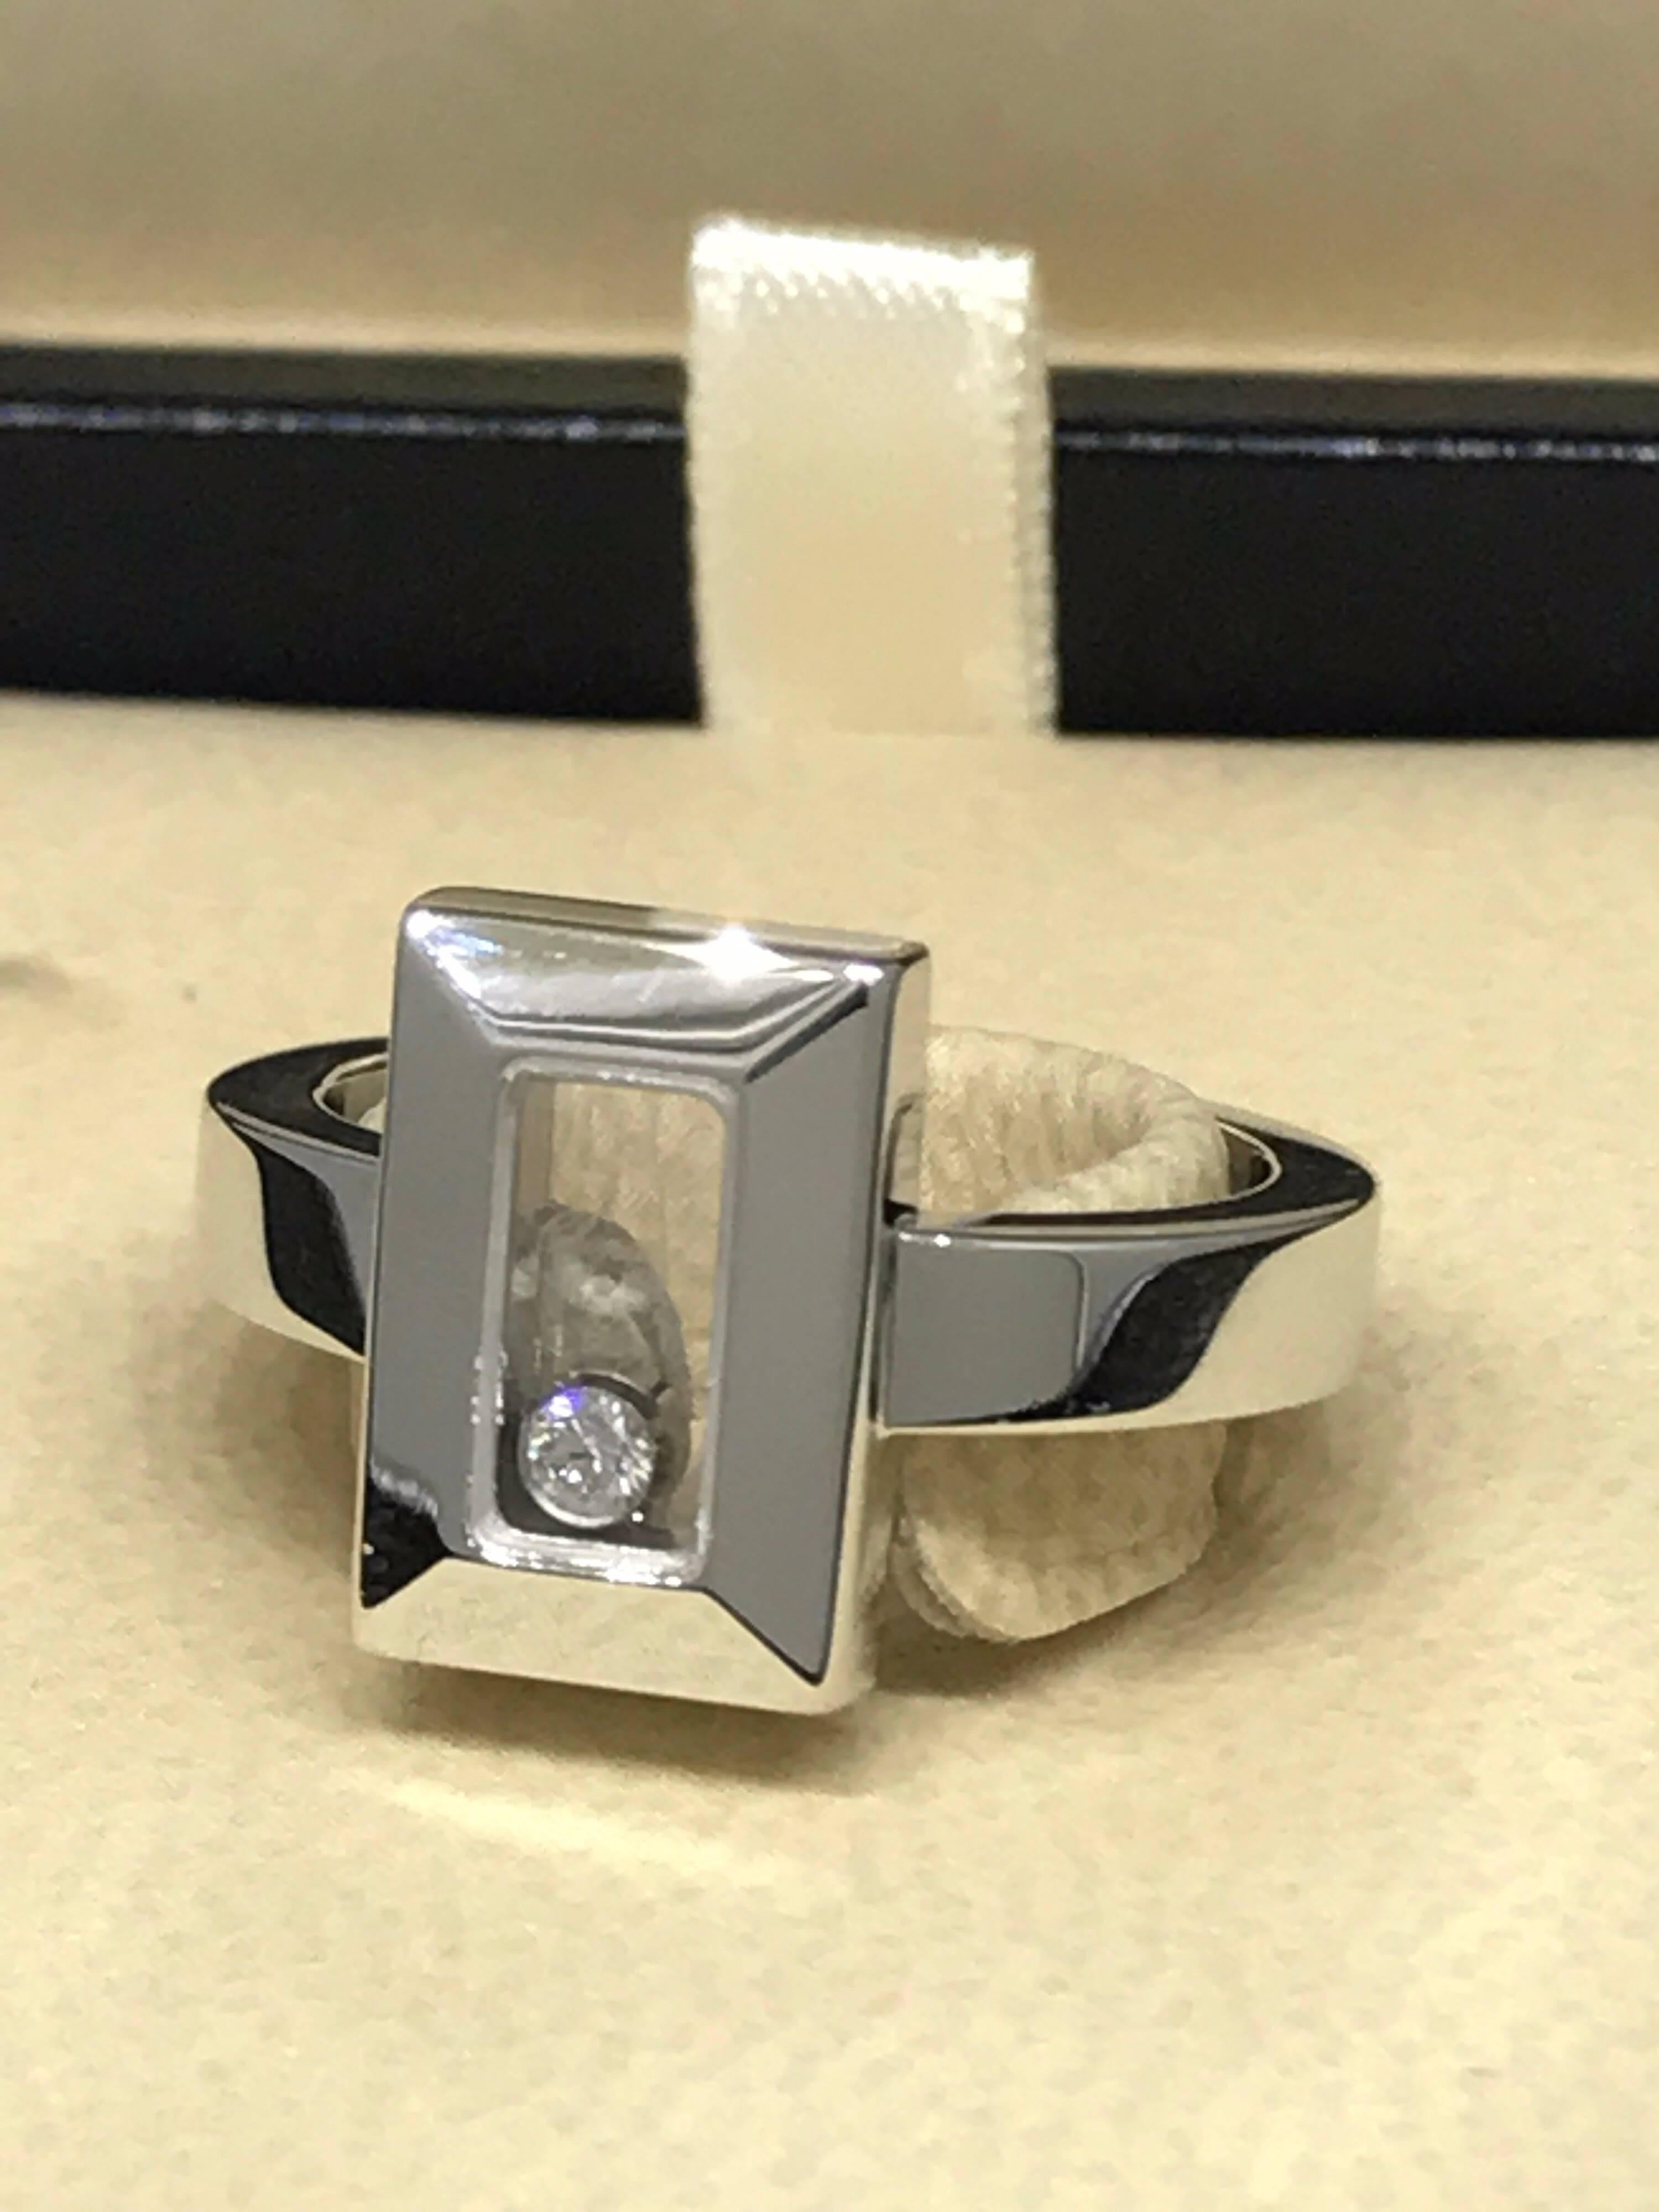 Chopard Happy Diamonds Rectangular Shape Ring

Model Number: 82/6729-1108

100% Authentic

Brand New

Comes with original Chopard box, certificate of authenticity and warranty, and jewels manual

18 Karat White Gold (8.20gr)

1 Floating Diamond (.05